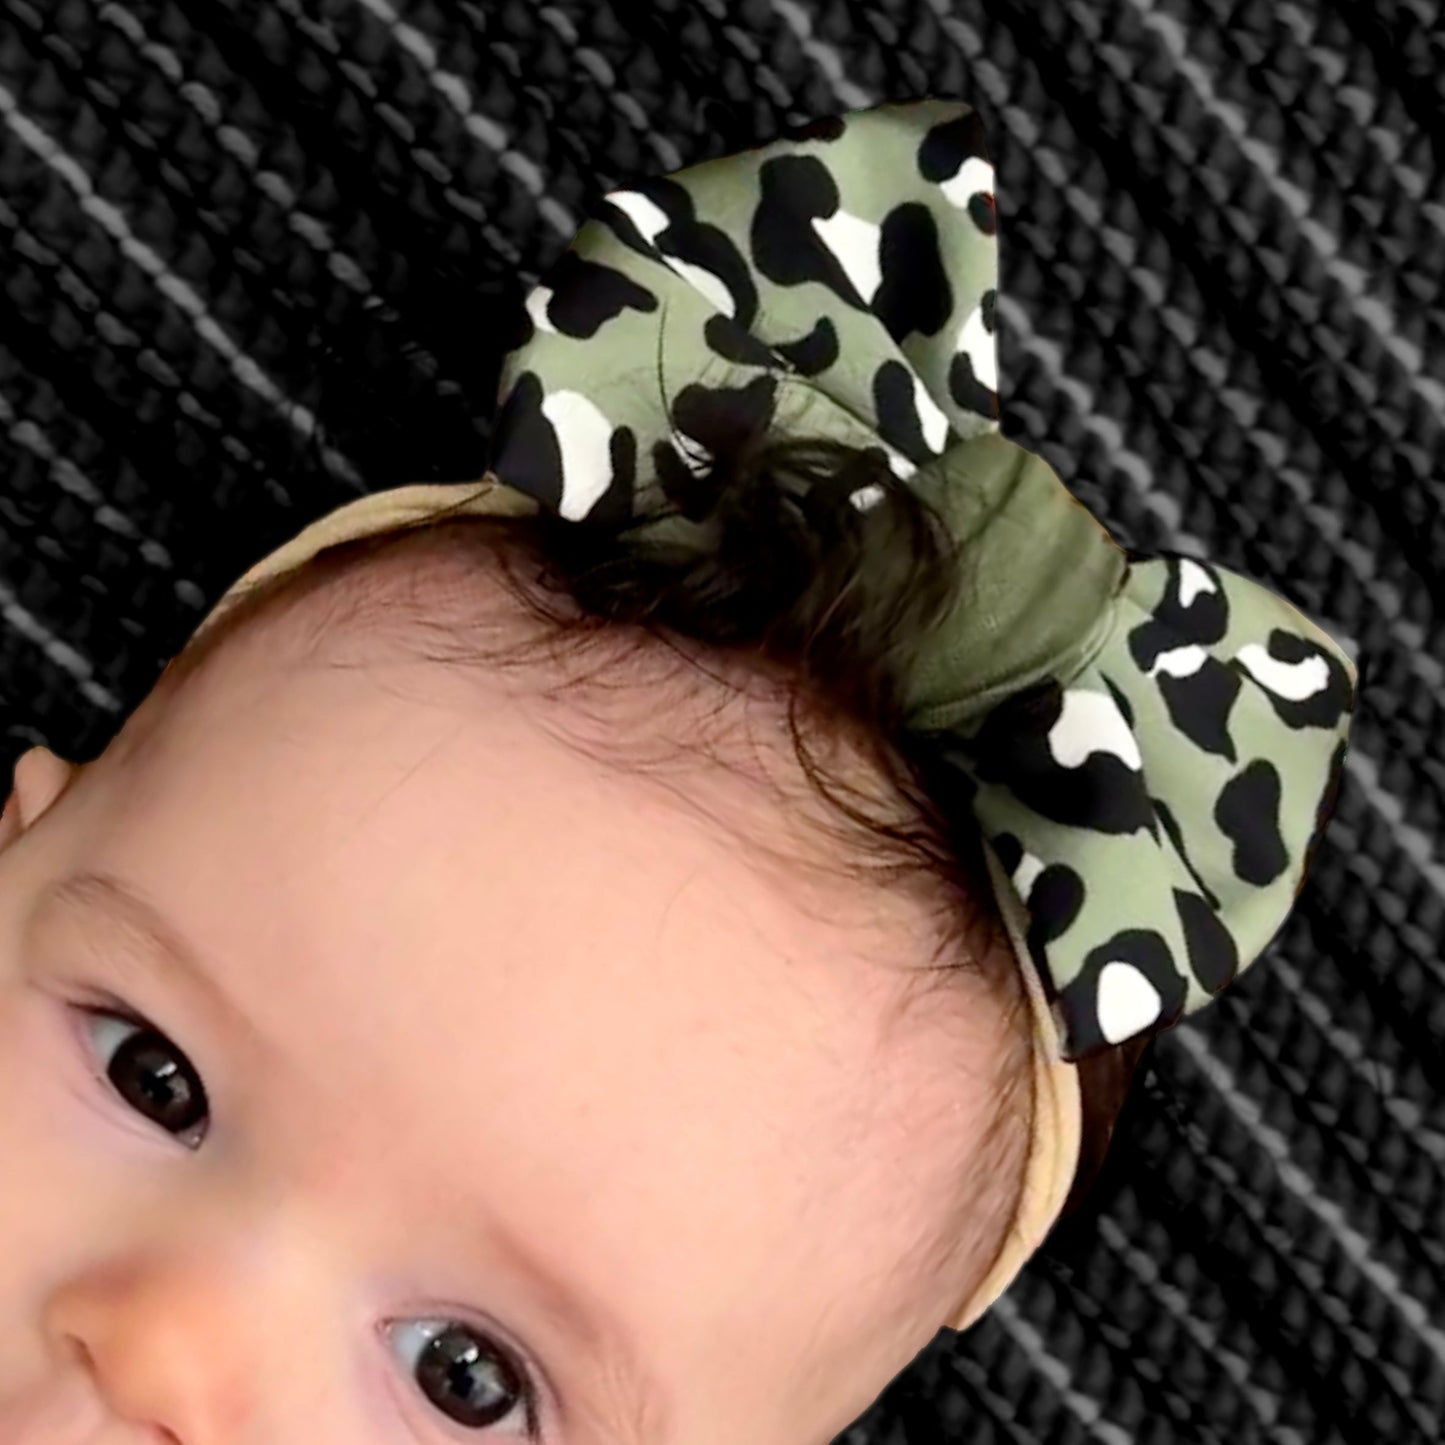 Olive Green Leopard Print Girl's Hair Bow (matching Mom Tee)